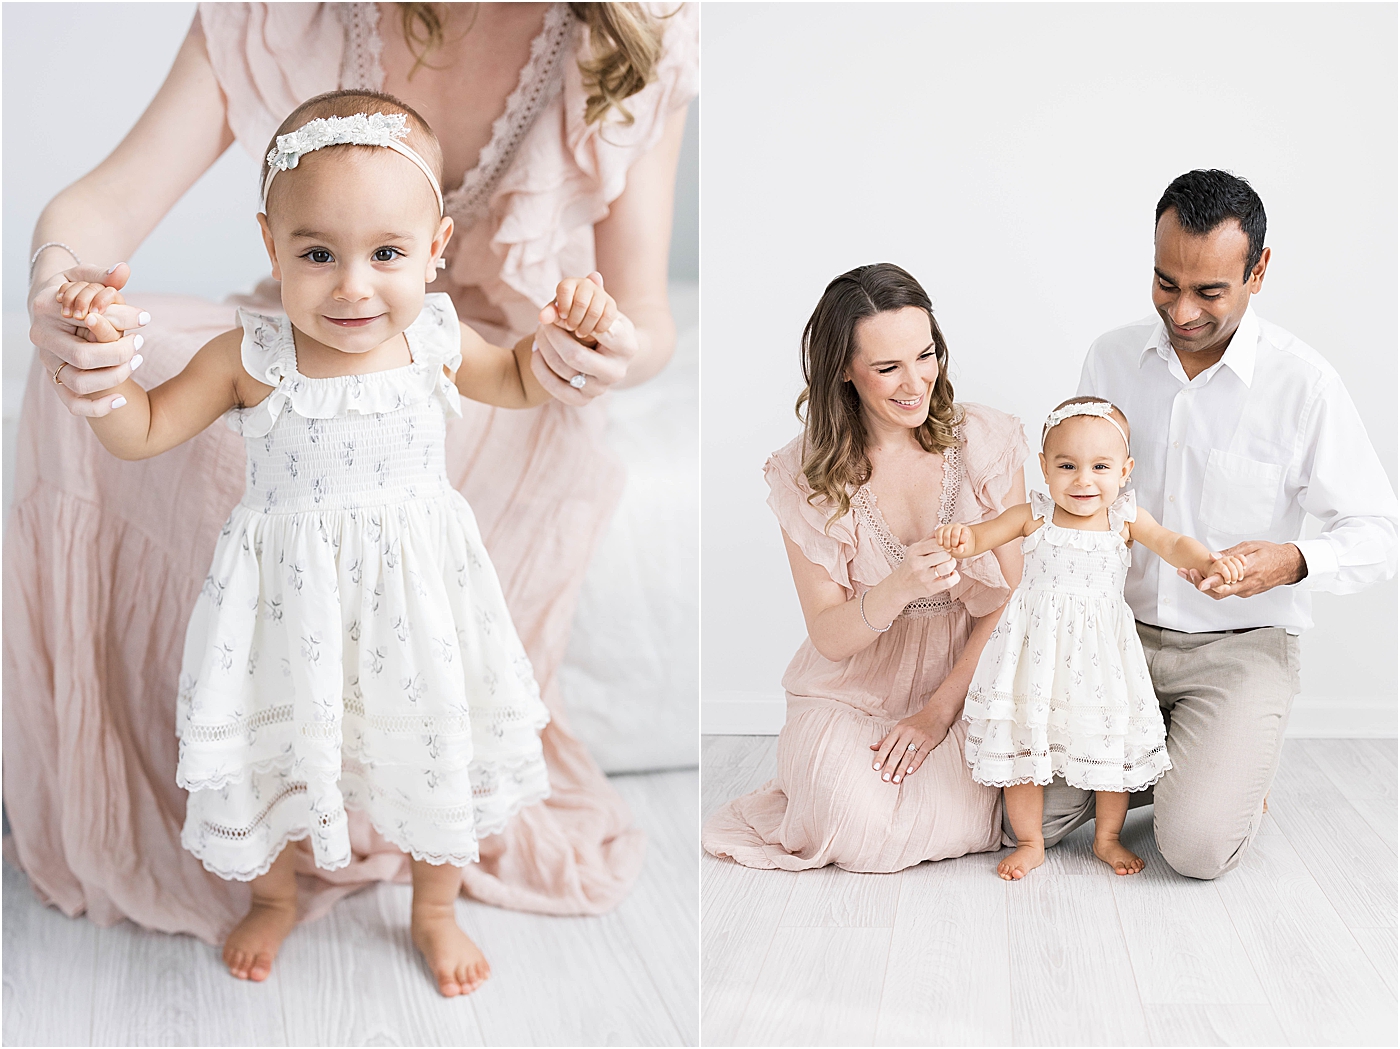 Family portraits during first birthday session for daughter | Lindsay Konopa Photography